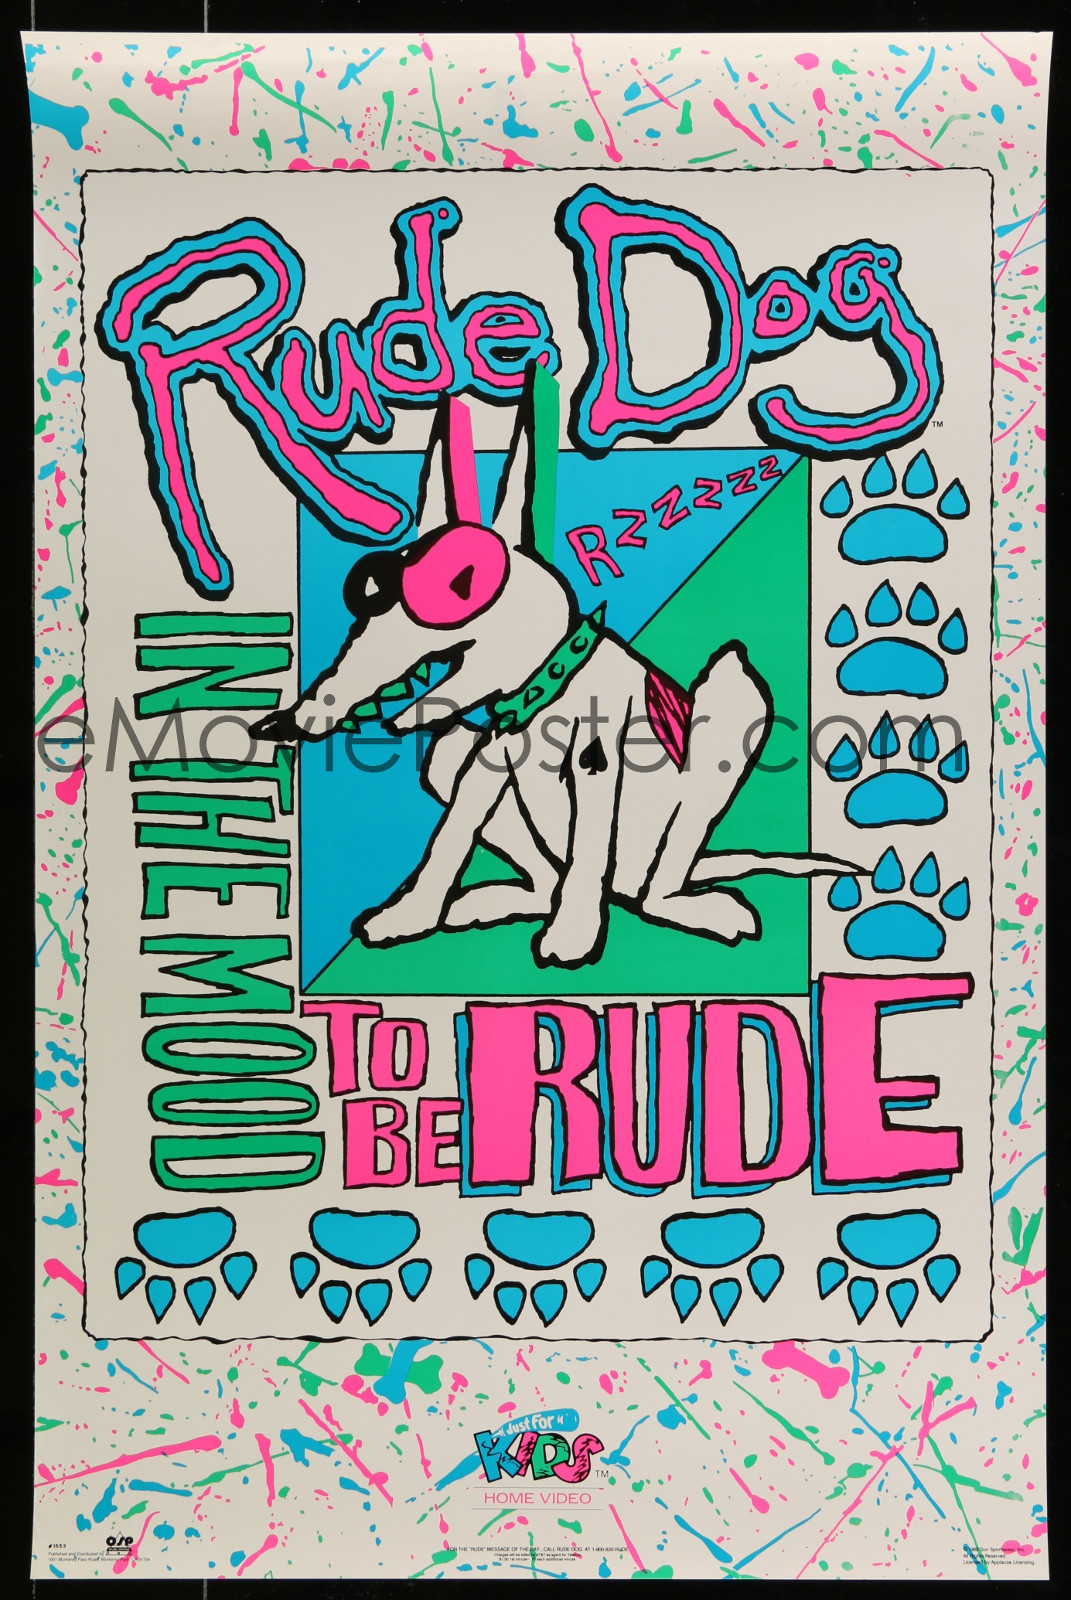 Rude Dog In The Mood To Be Rude 2A323 A Part Of A Lot 18 Unfolded Single-Sided Video Posters '90S A Variety Of Movie Images!